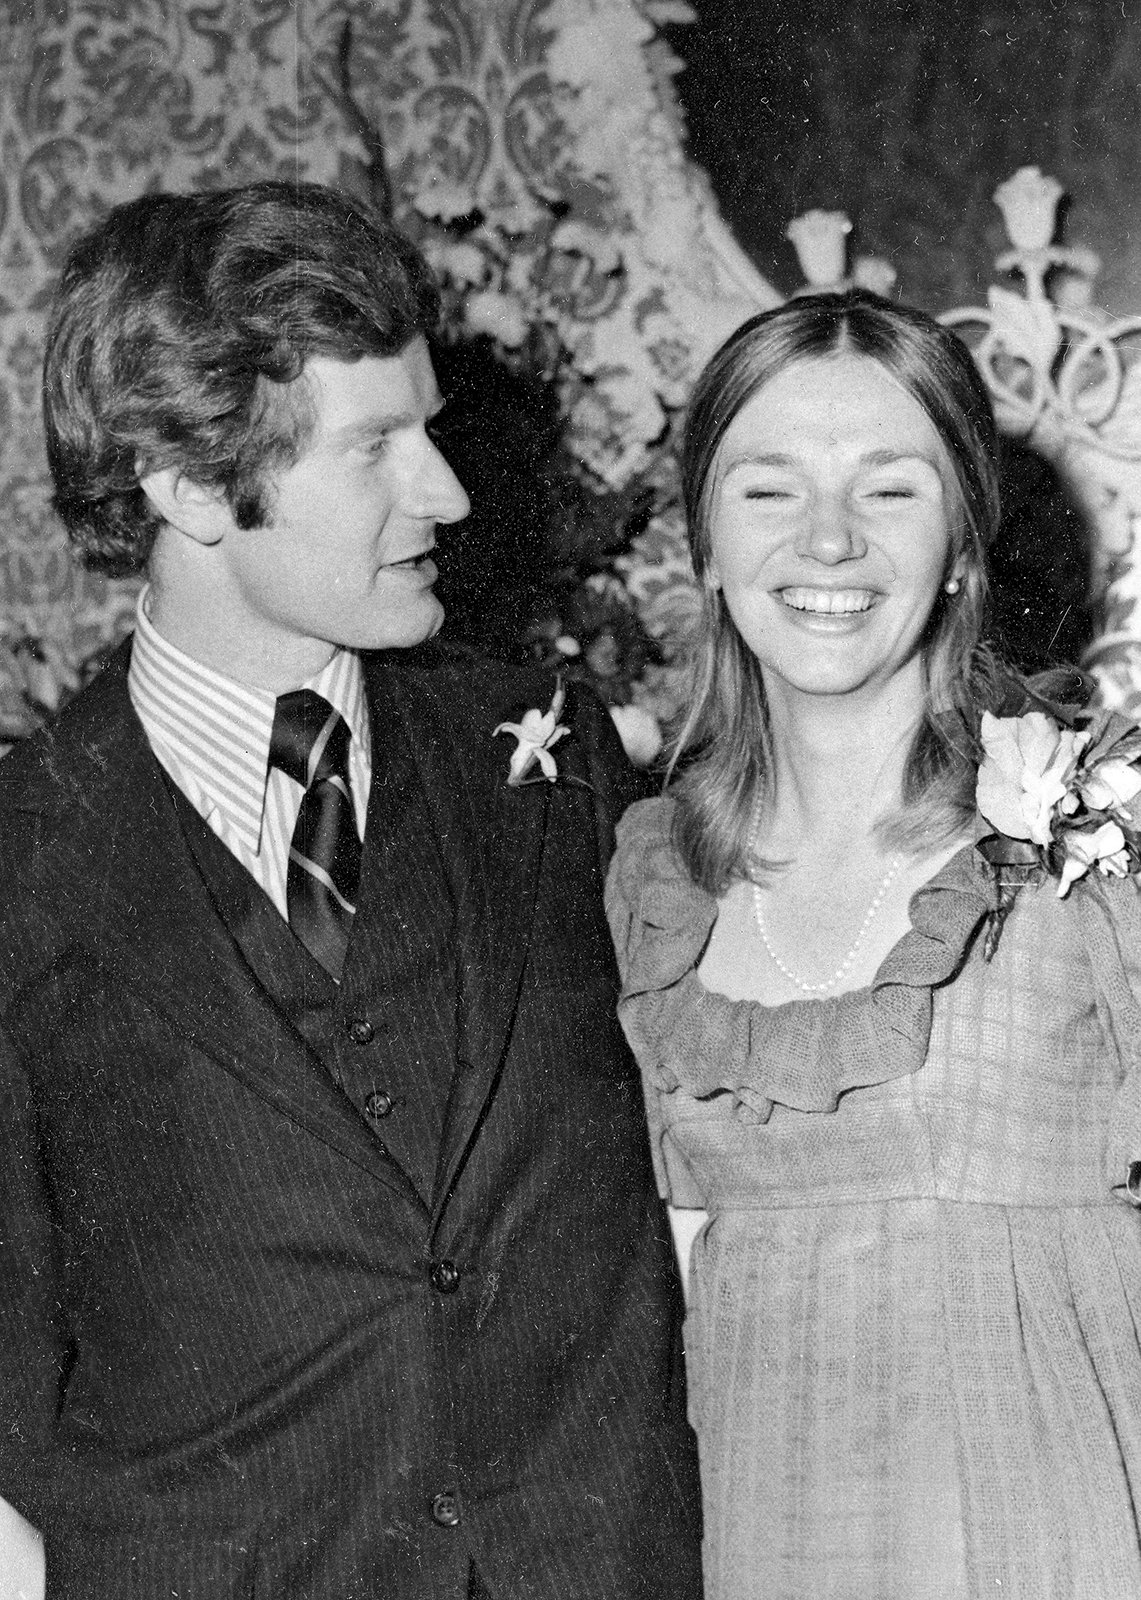 Cormac and Moira at their Irish wedding reception, Russell Hotel, St. Stephen’s Green, late September 1971.